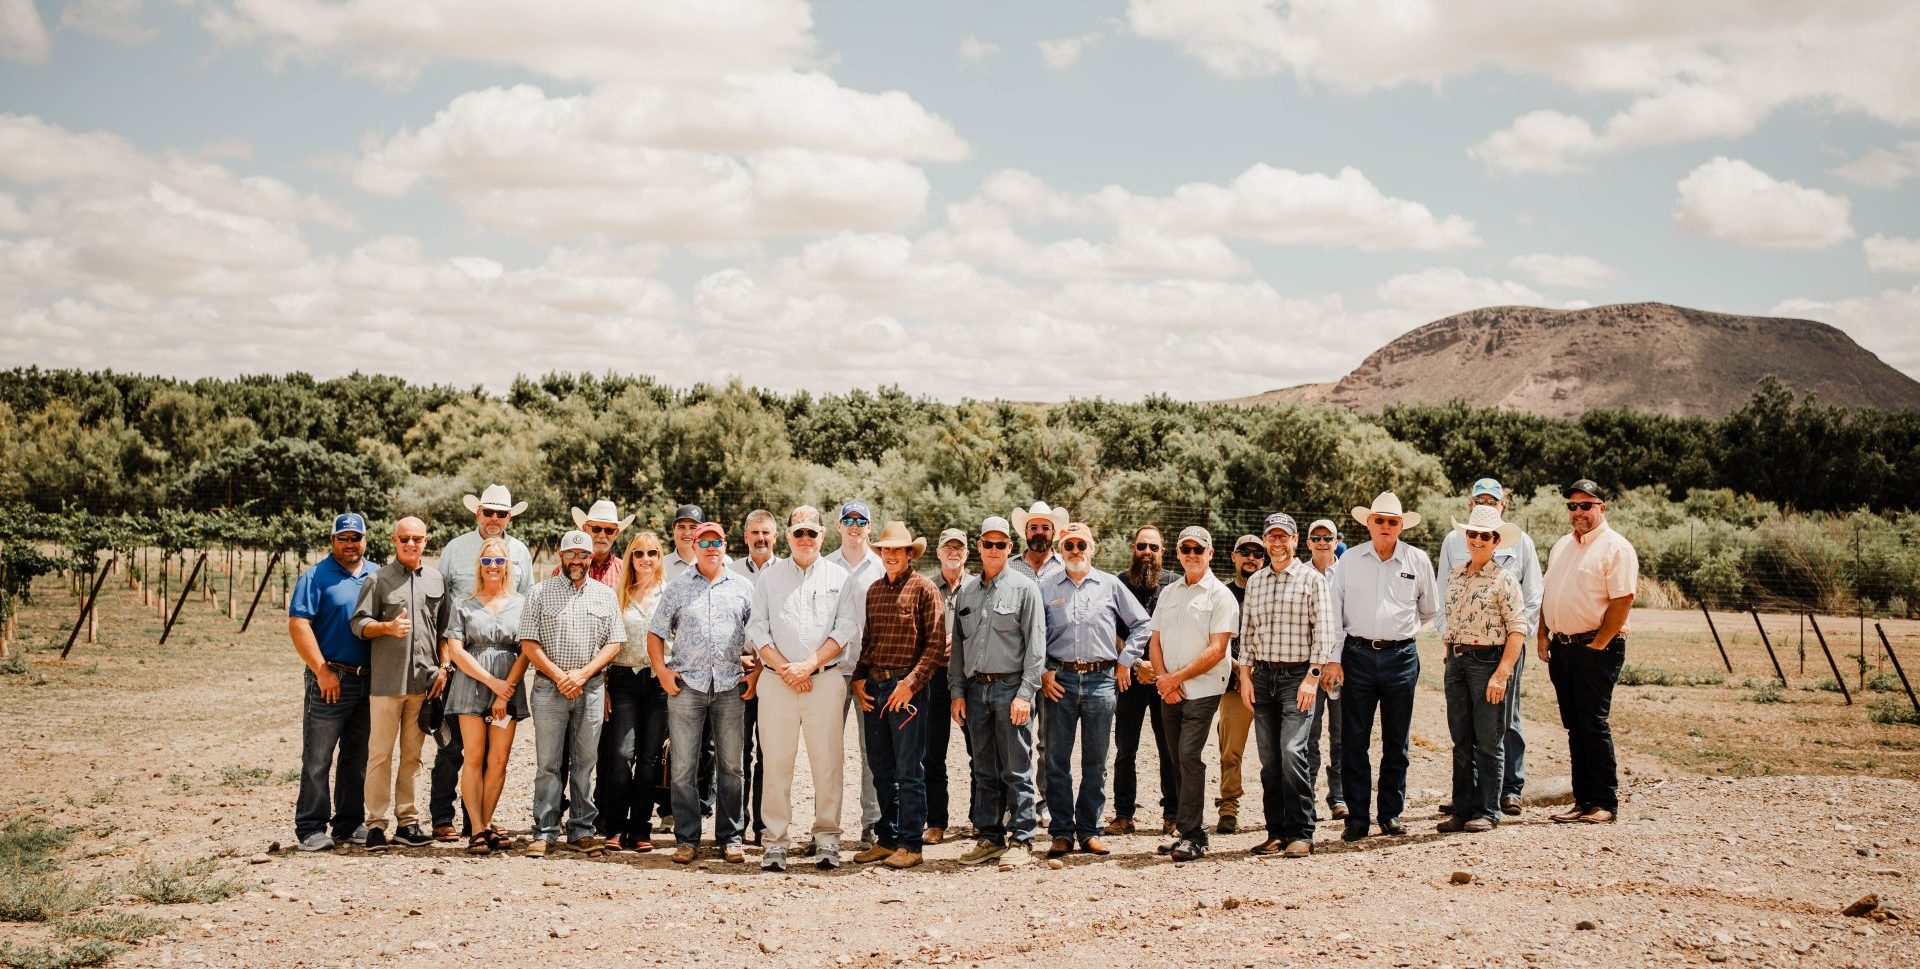 AgTrust Farm Credit Board of Directors and Executive Team at a vineyard in New Mexico